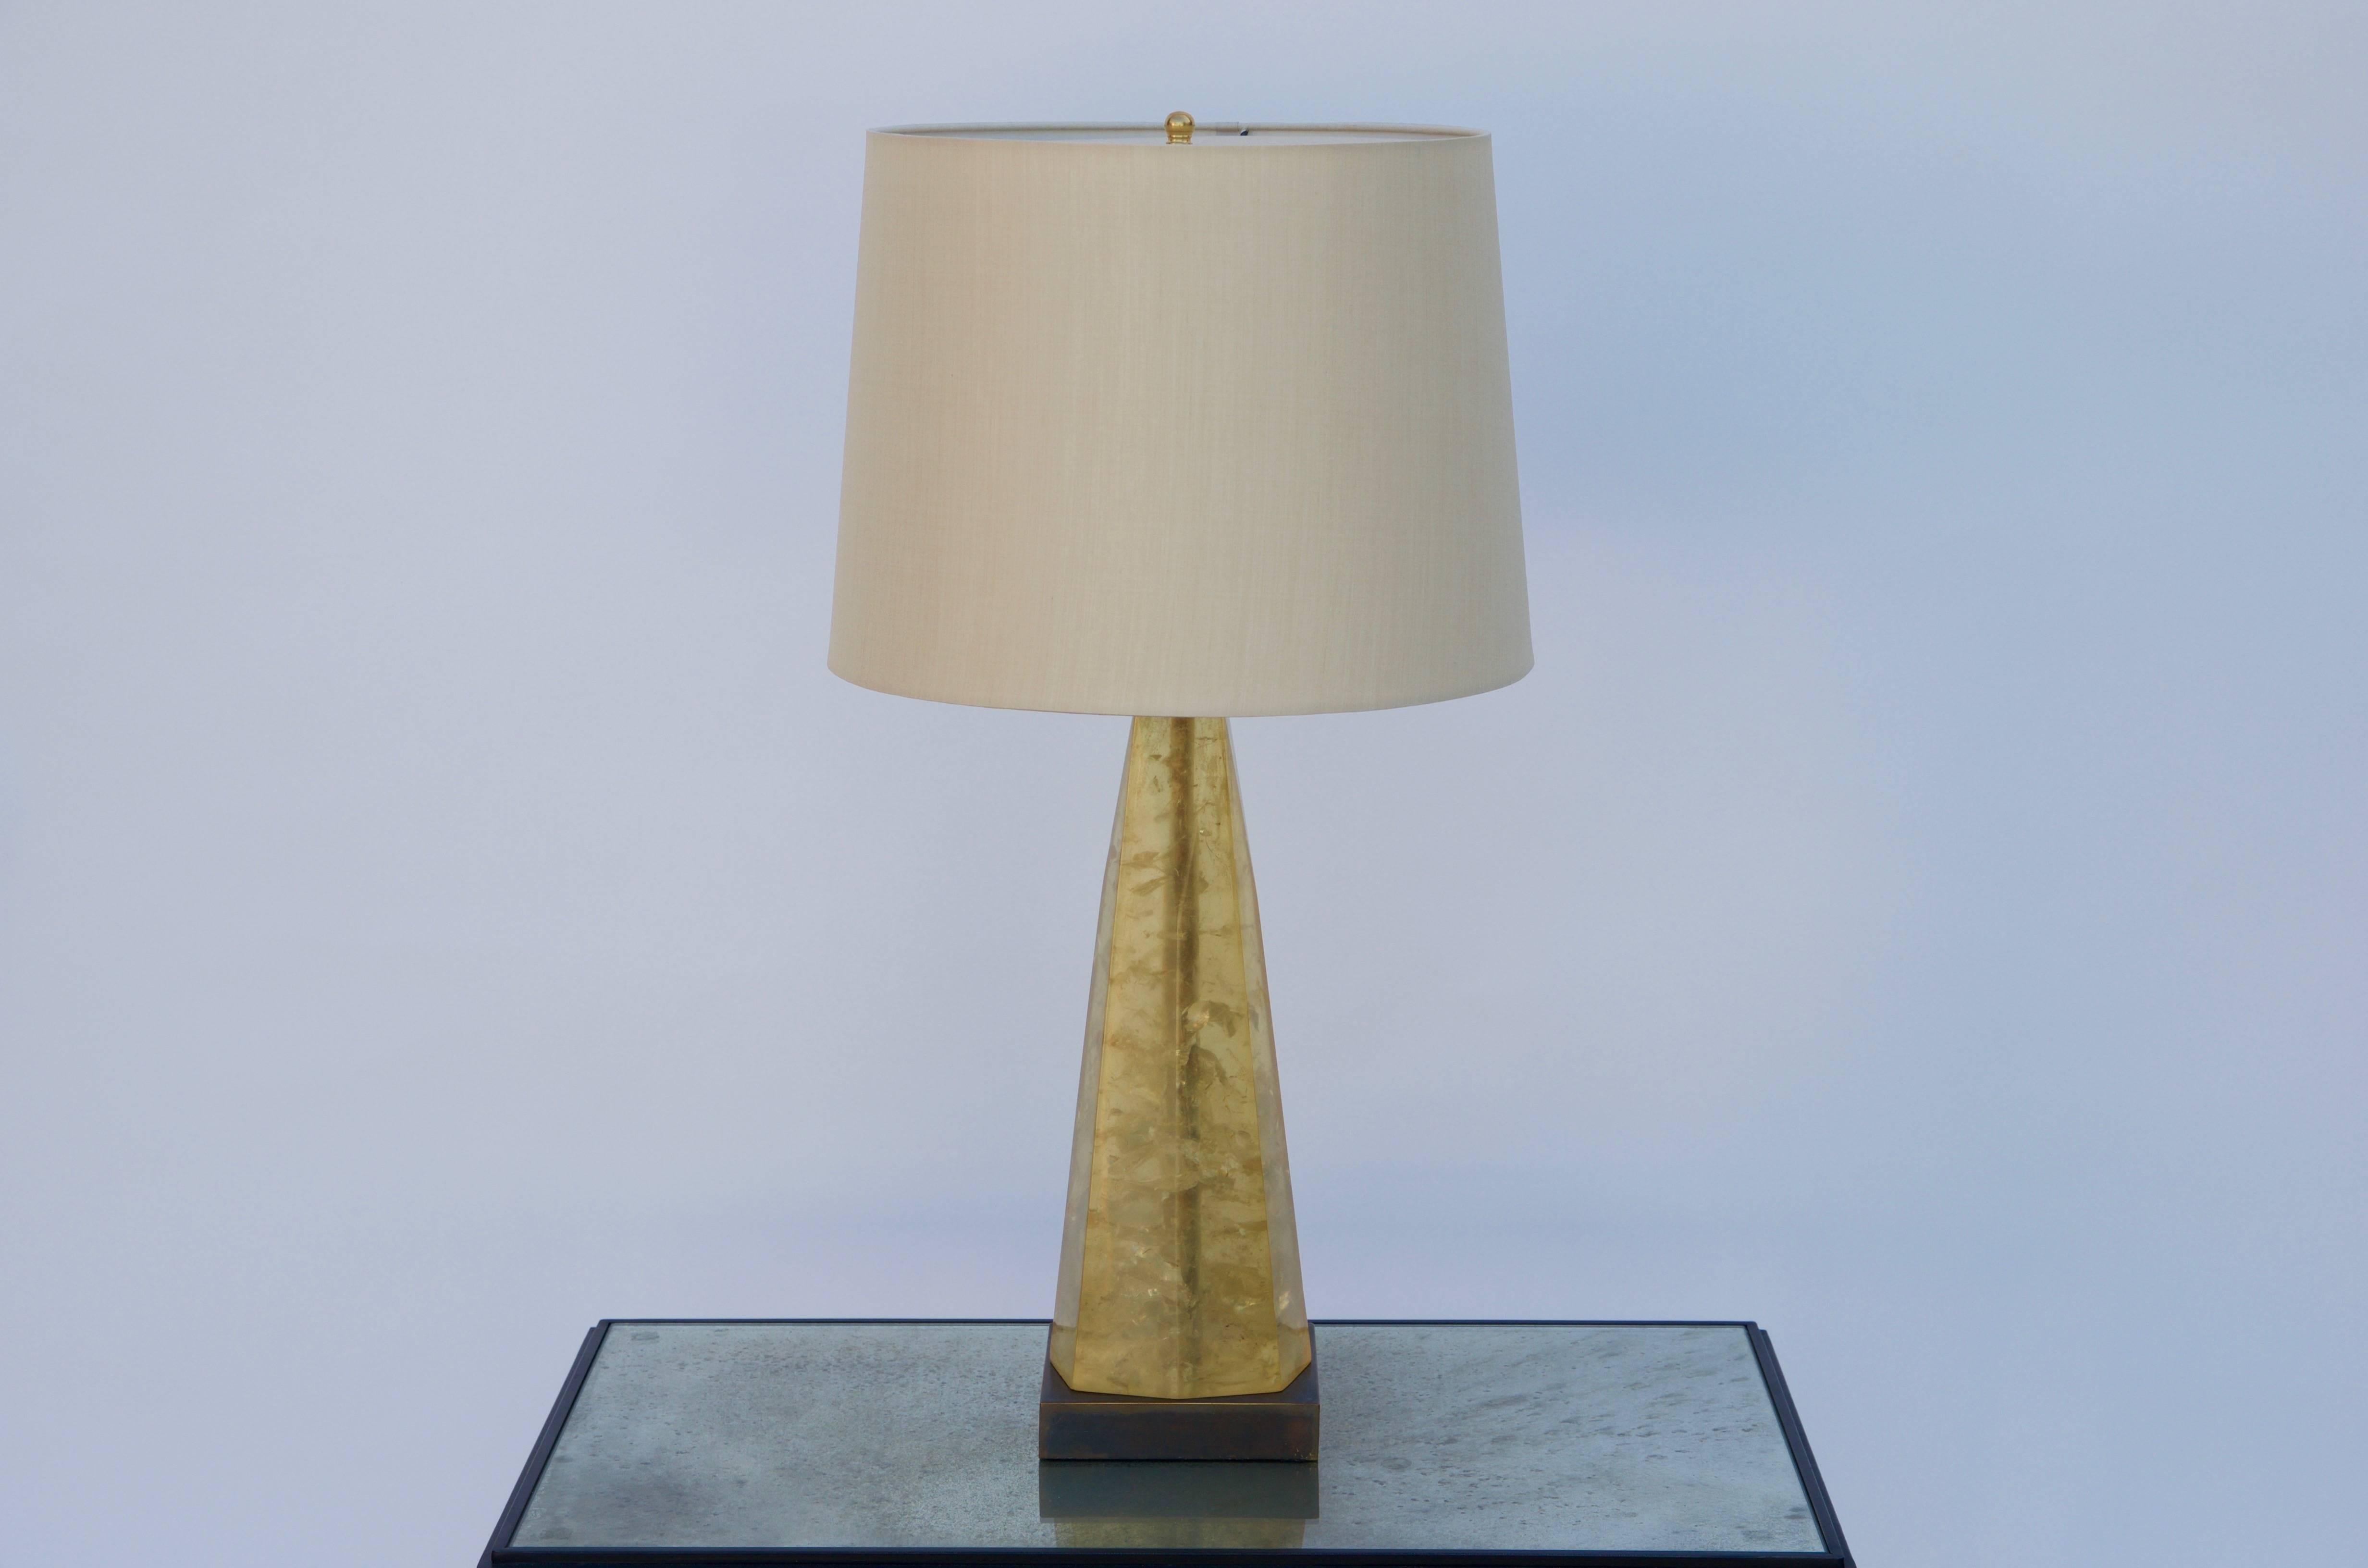 Fractal resin lamp in the style of Marie-Claude de Fouquières, circa 1975. Obelisk shaped fractal resin column over a patinated brass base. Rewired with custom cream silk shade and matching top diffuser. Very chic lamp.

Shade measurement : 14'